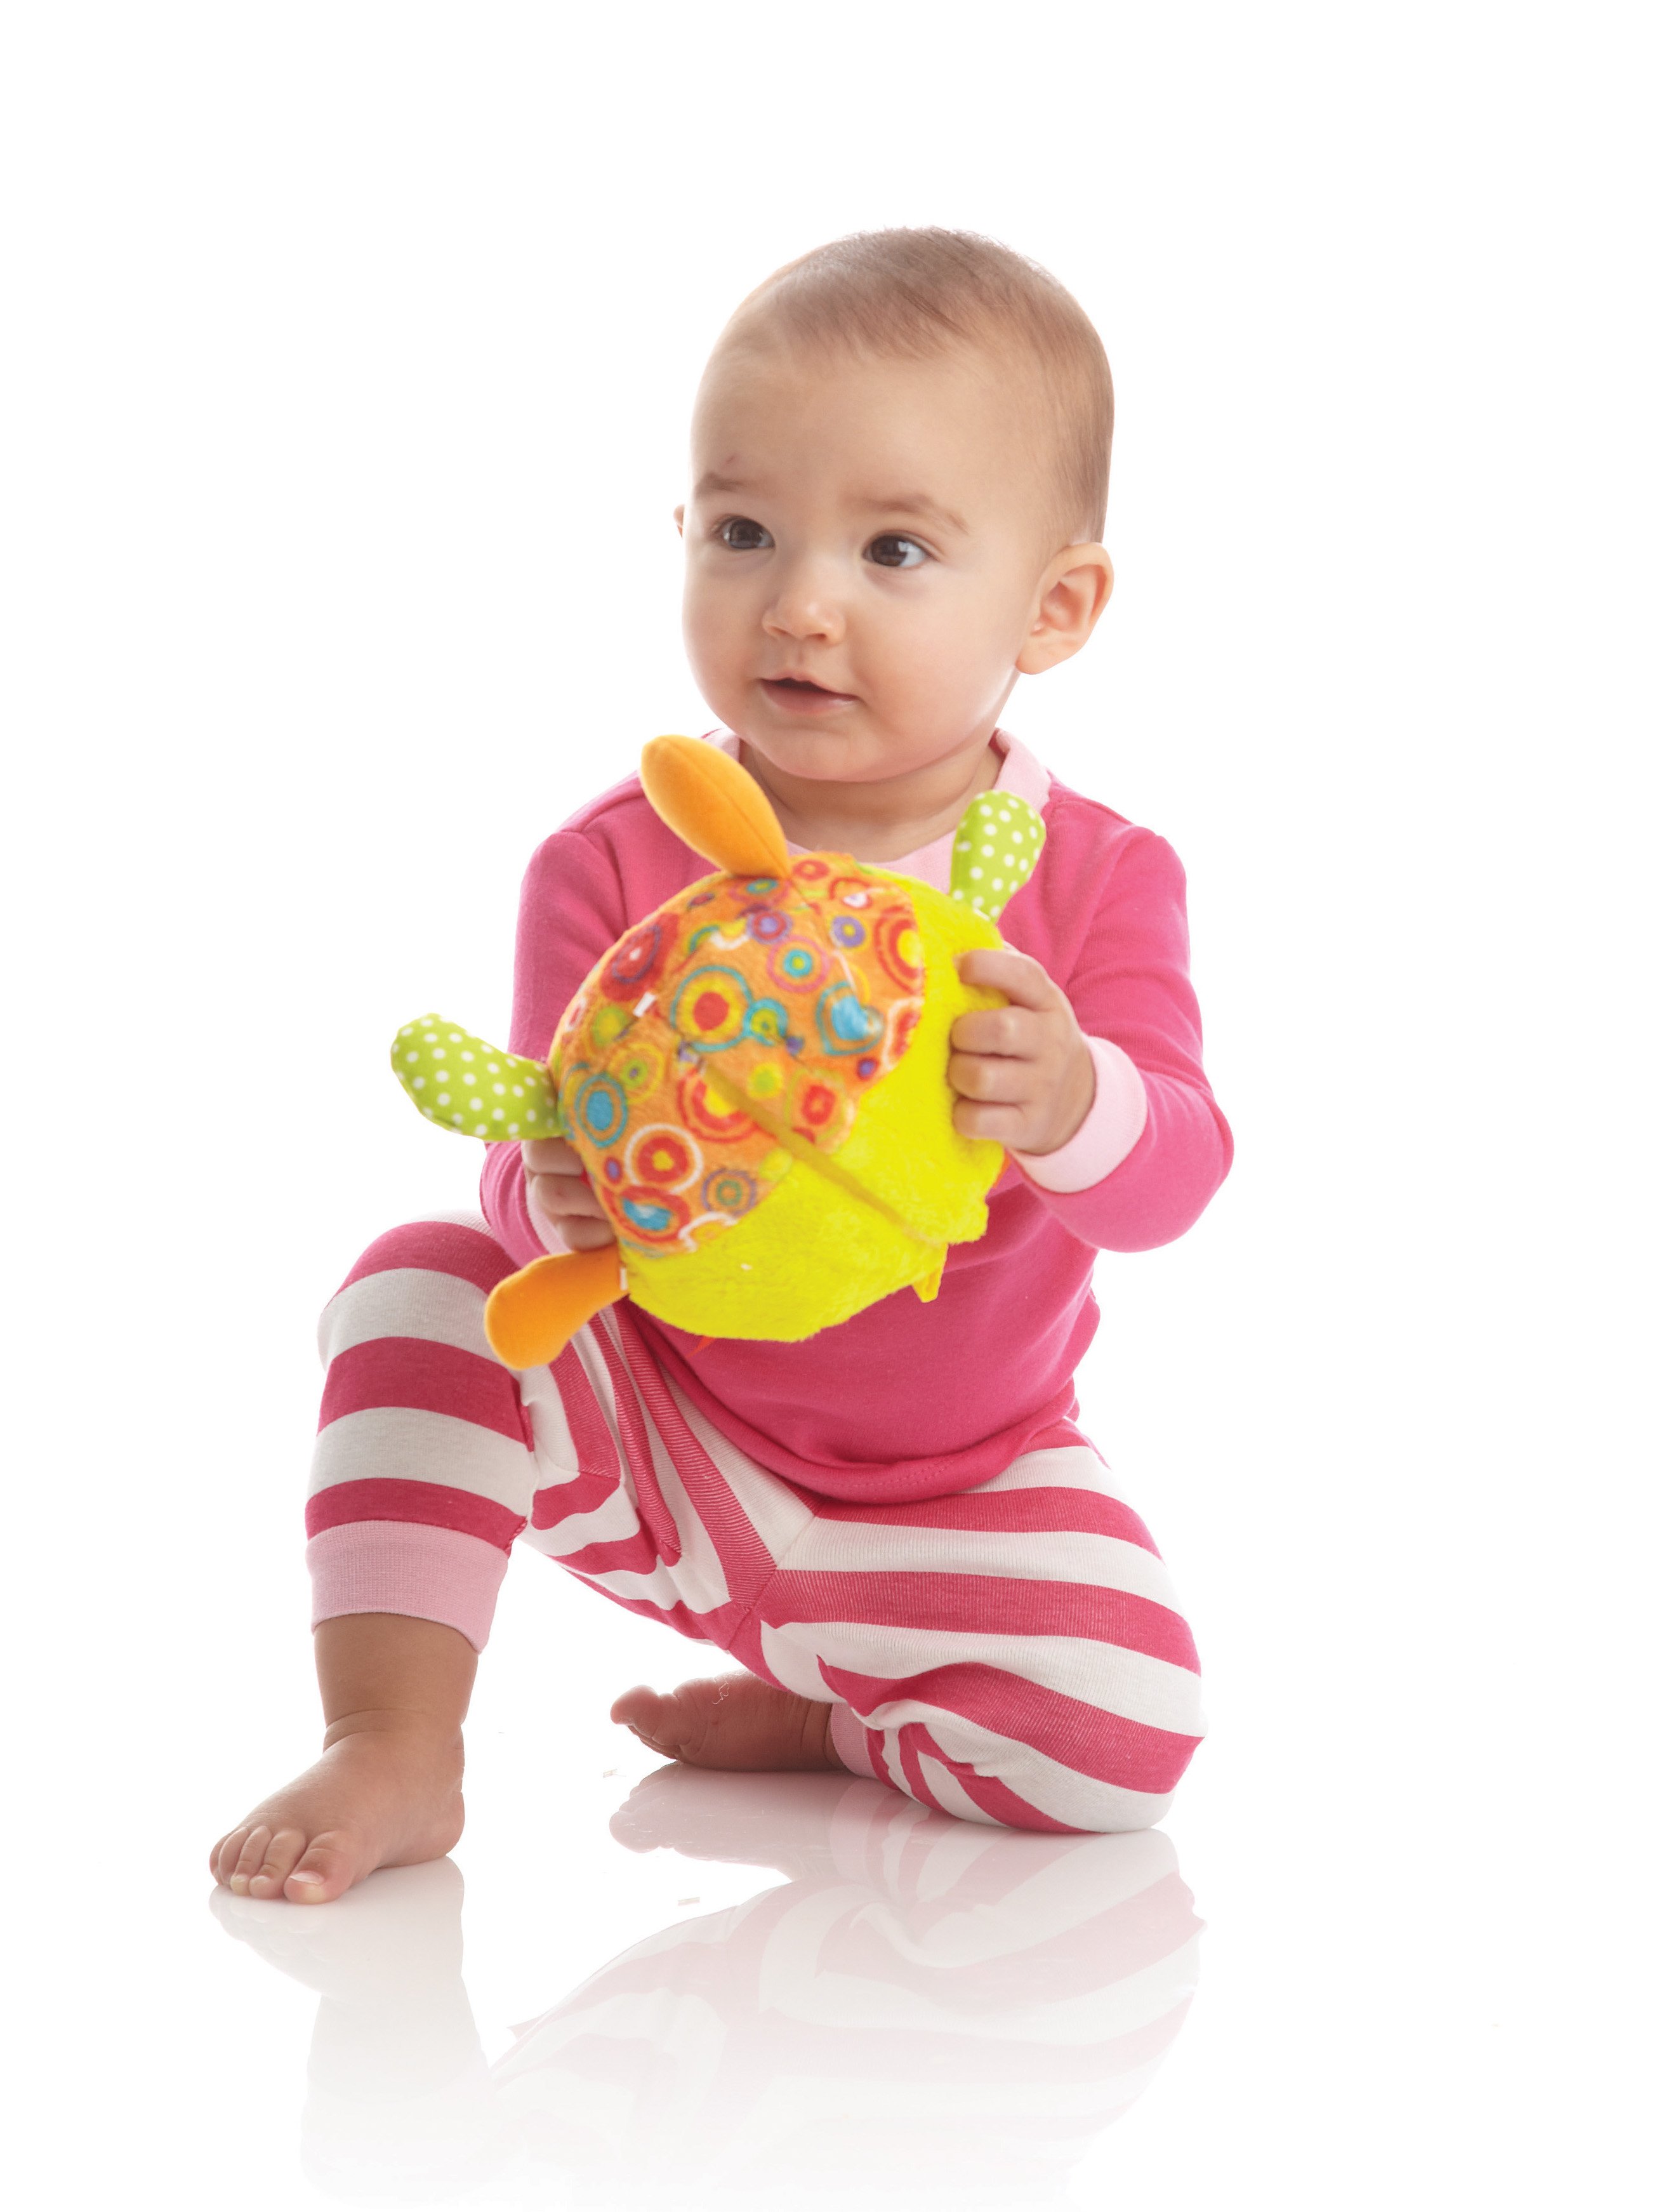 The best toys for baby